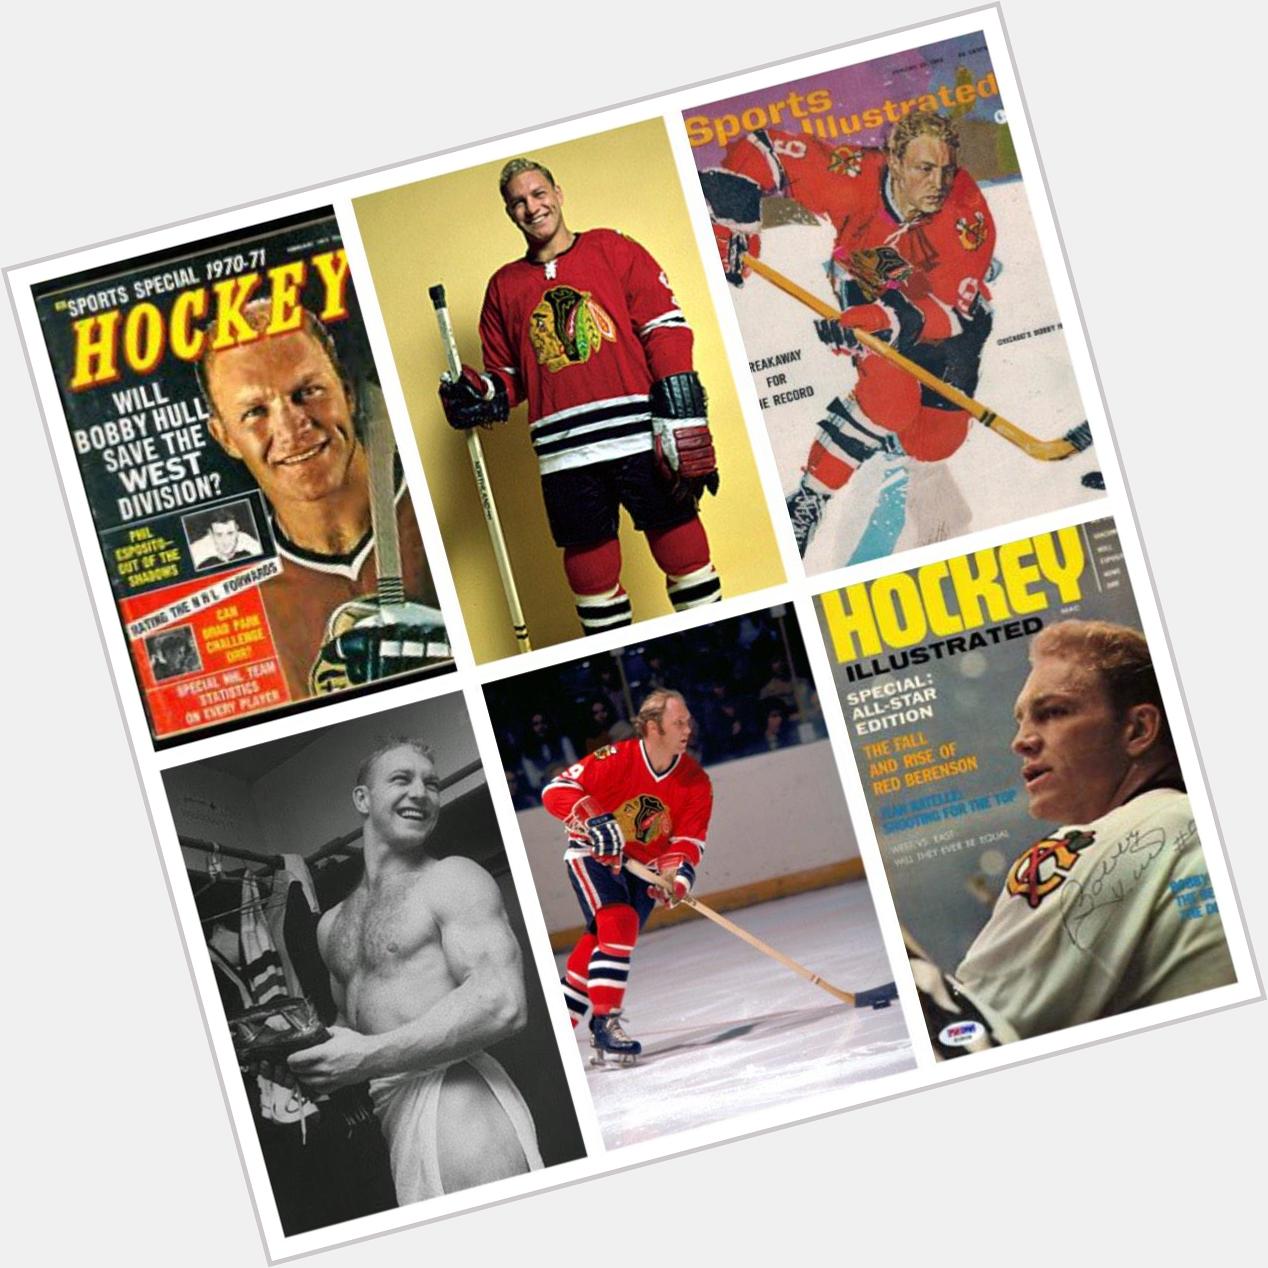 Wishing an early Happy Birthday to the \"Golden Jet\" Bobby Hull, who turns 75 on Saturday January 3rd. 